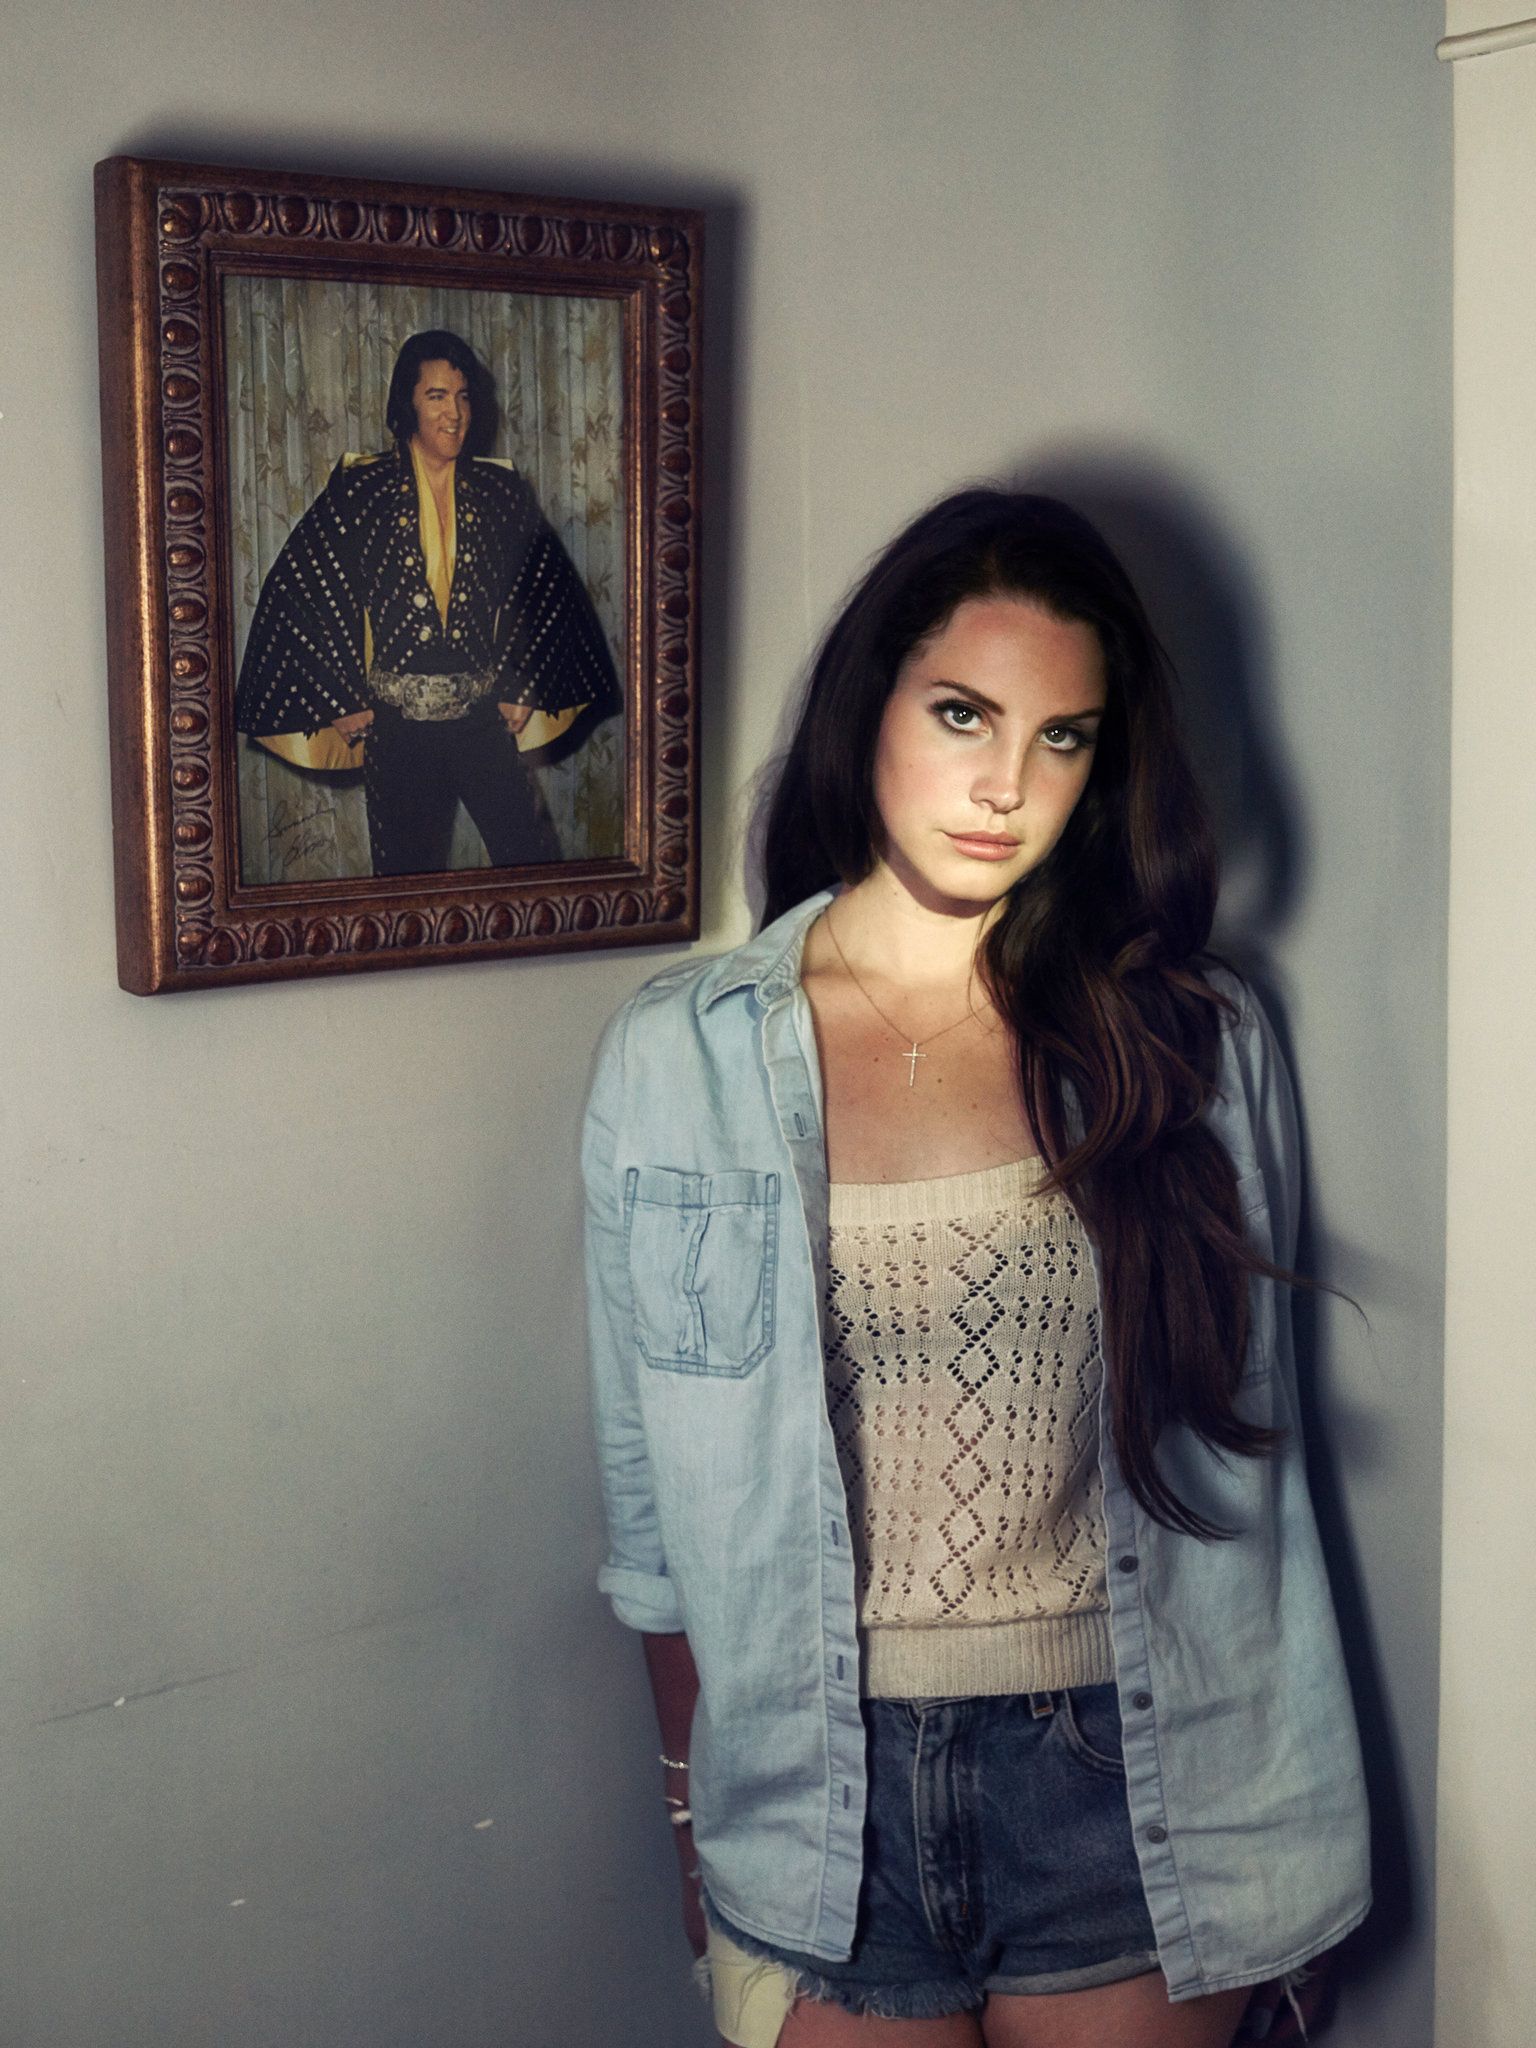 Lana Del Rey Still Stirs Things Up With 'Ultraviolence'